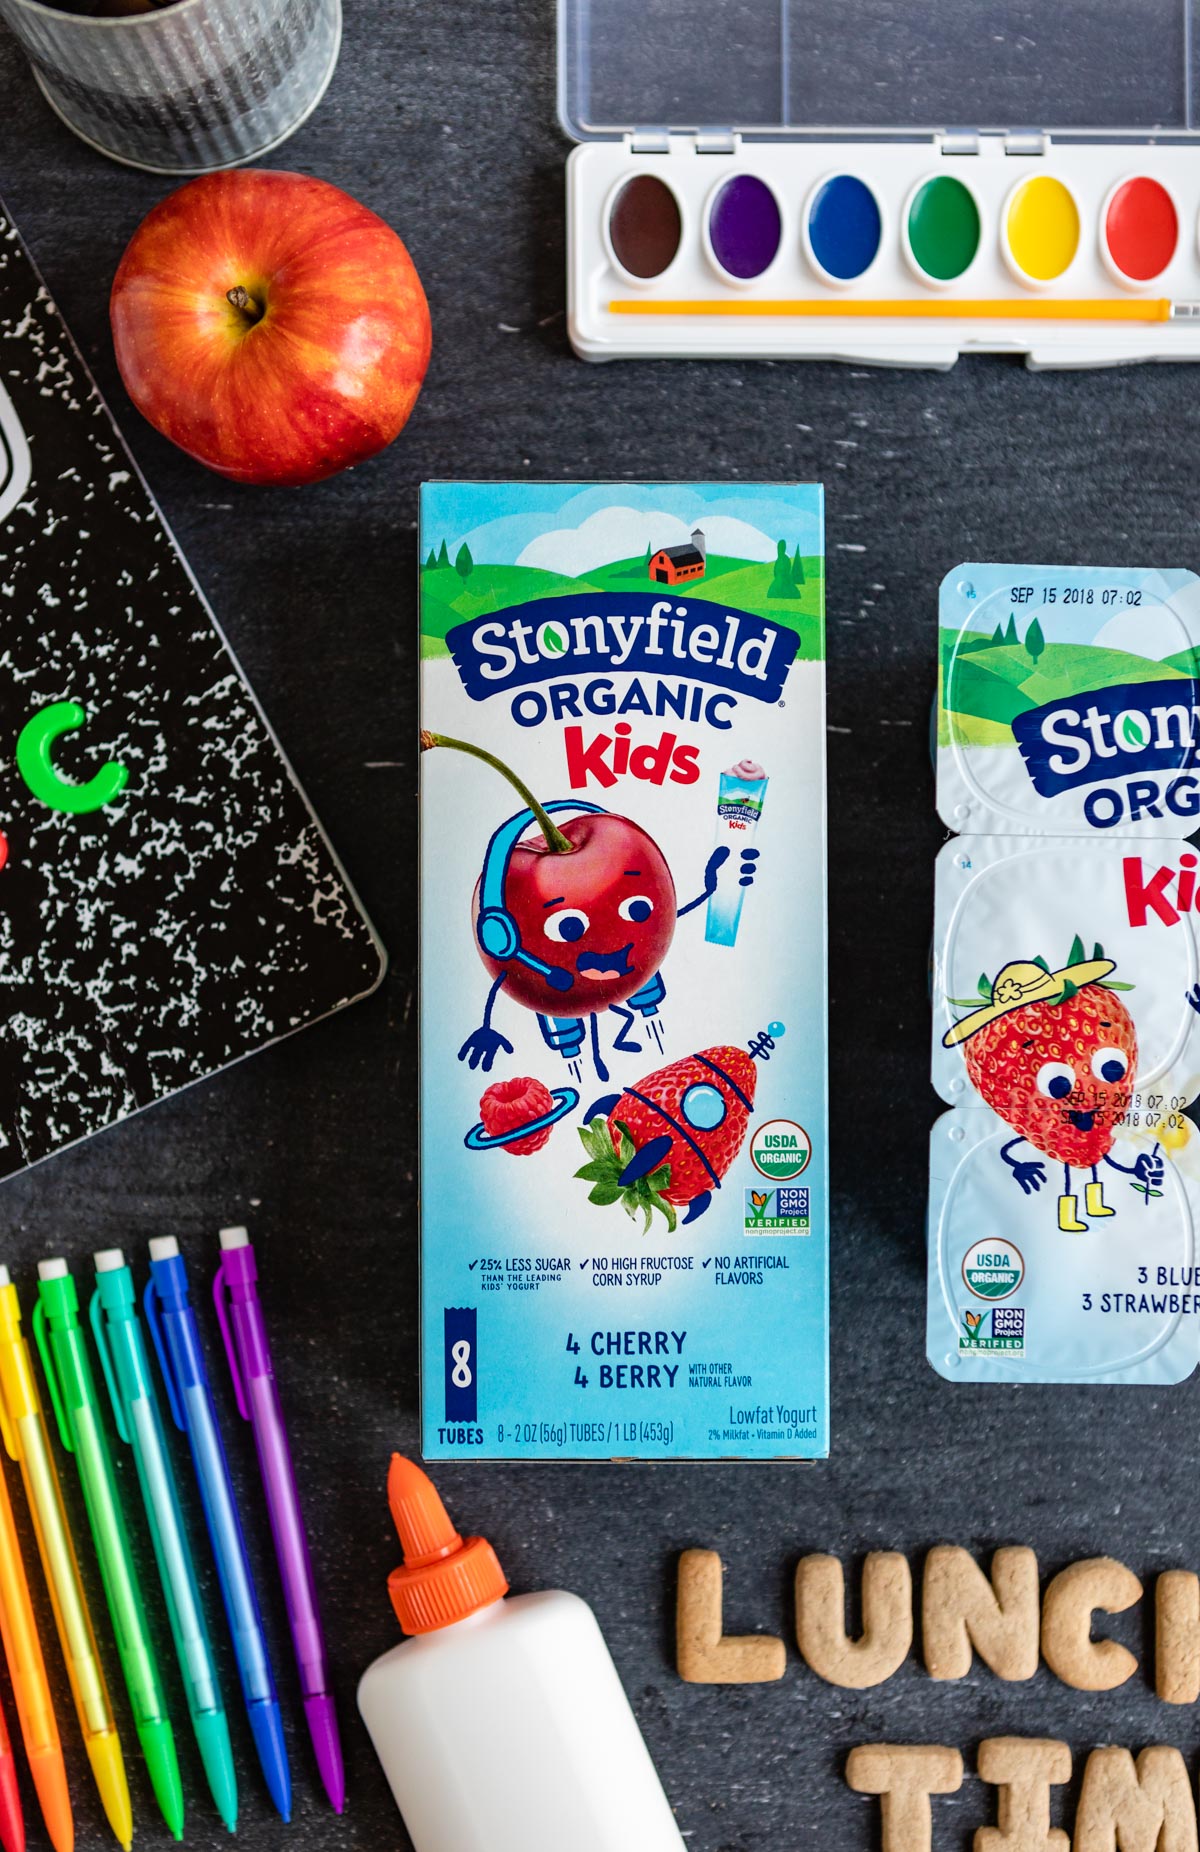 Stonyfield Kids | Organic | Three Lunch Box Ideas for Three Age Groups — from Pre-K through 6th Grade featured by popular design and mom blogger Design Mom